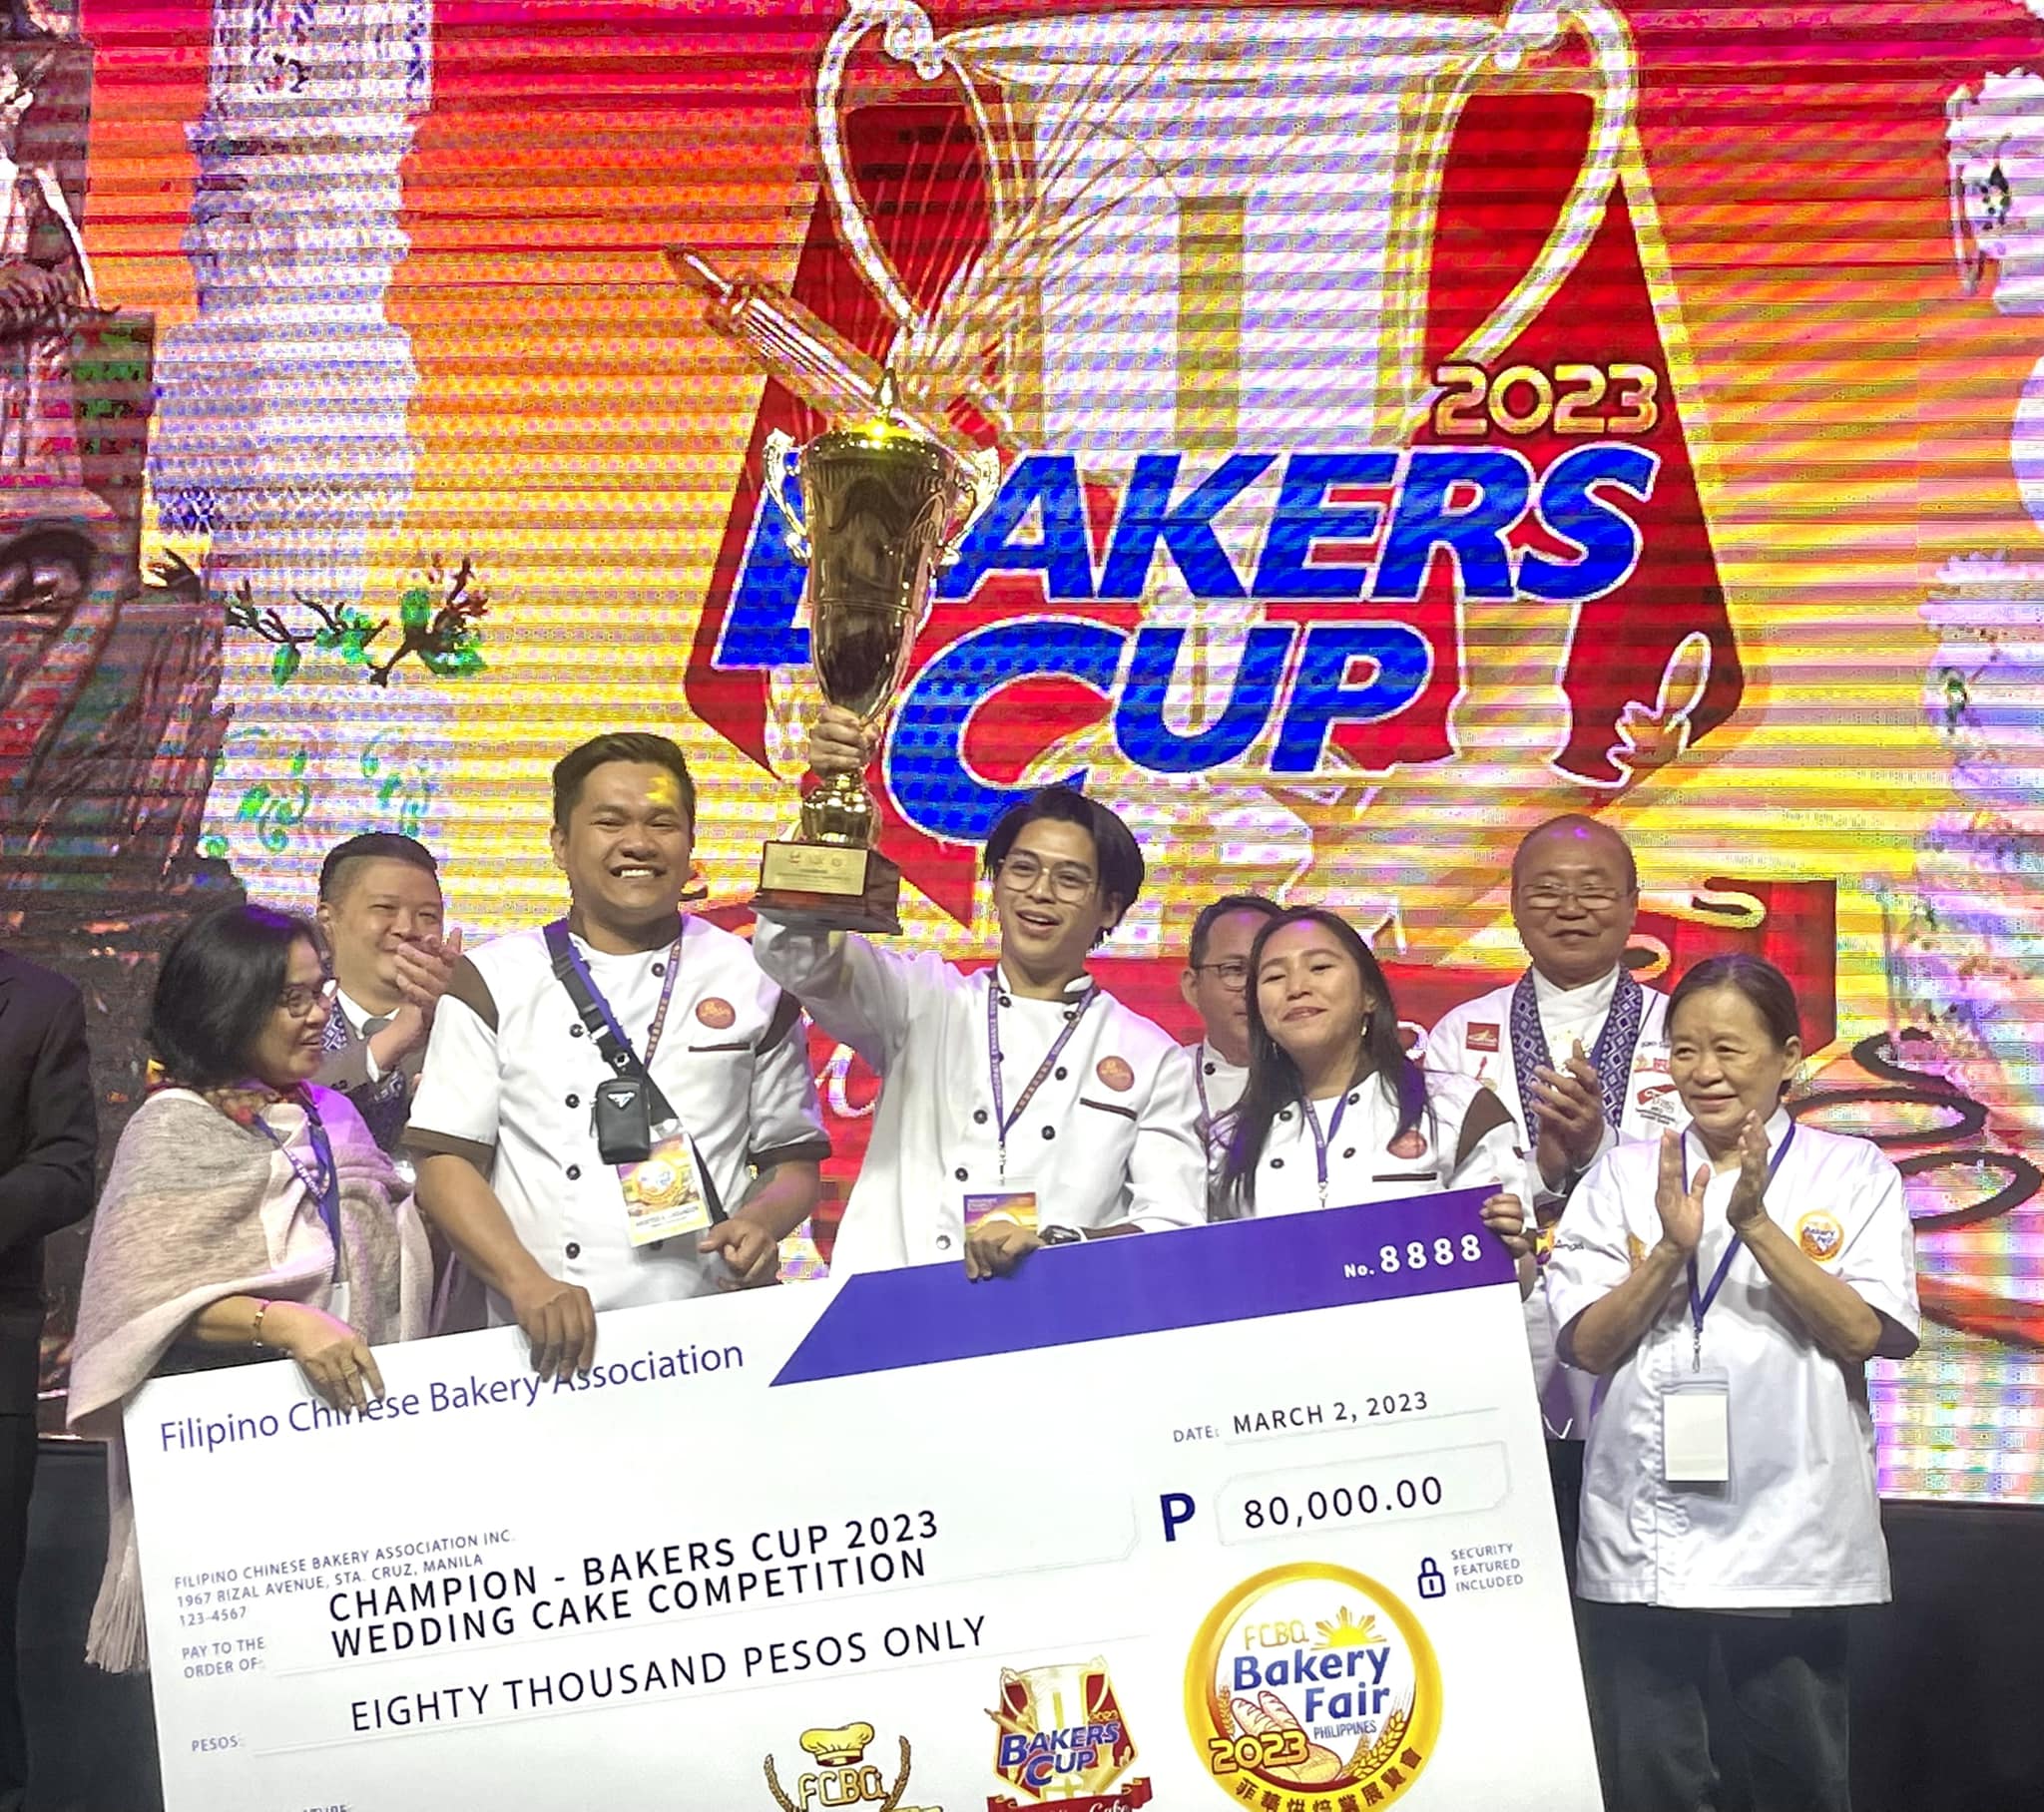 Filipino Chef Wins At Bakers Cup Wedding Cake Competition